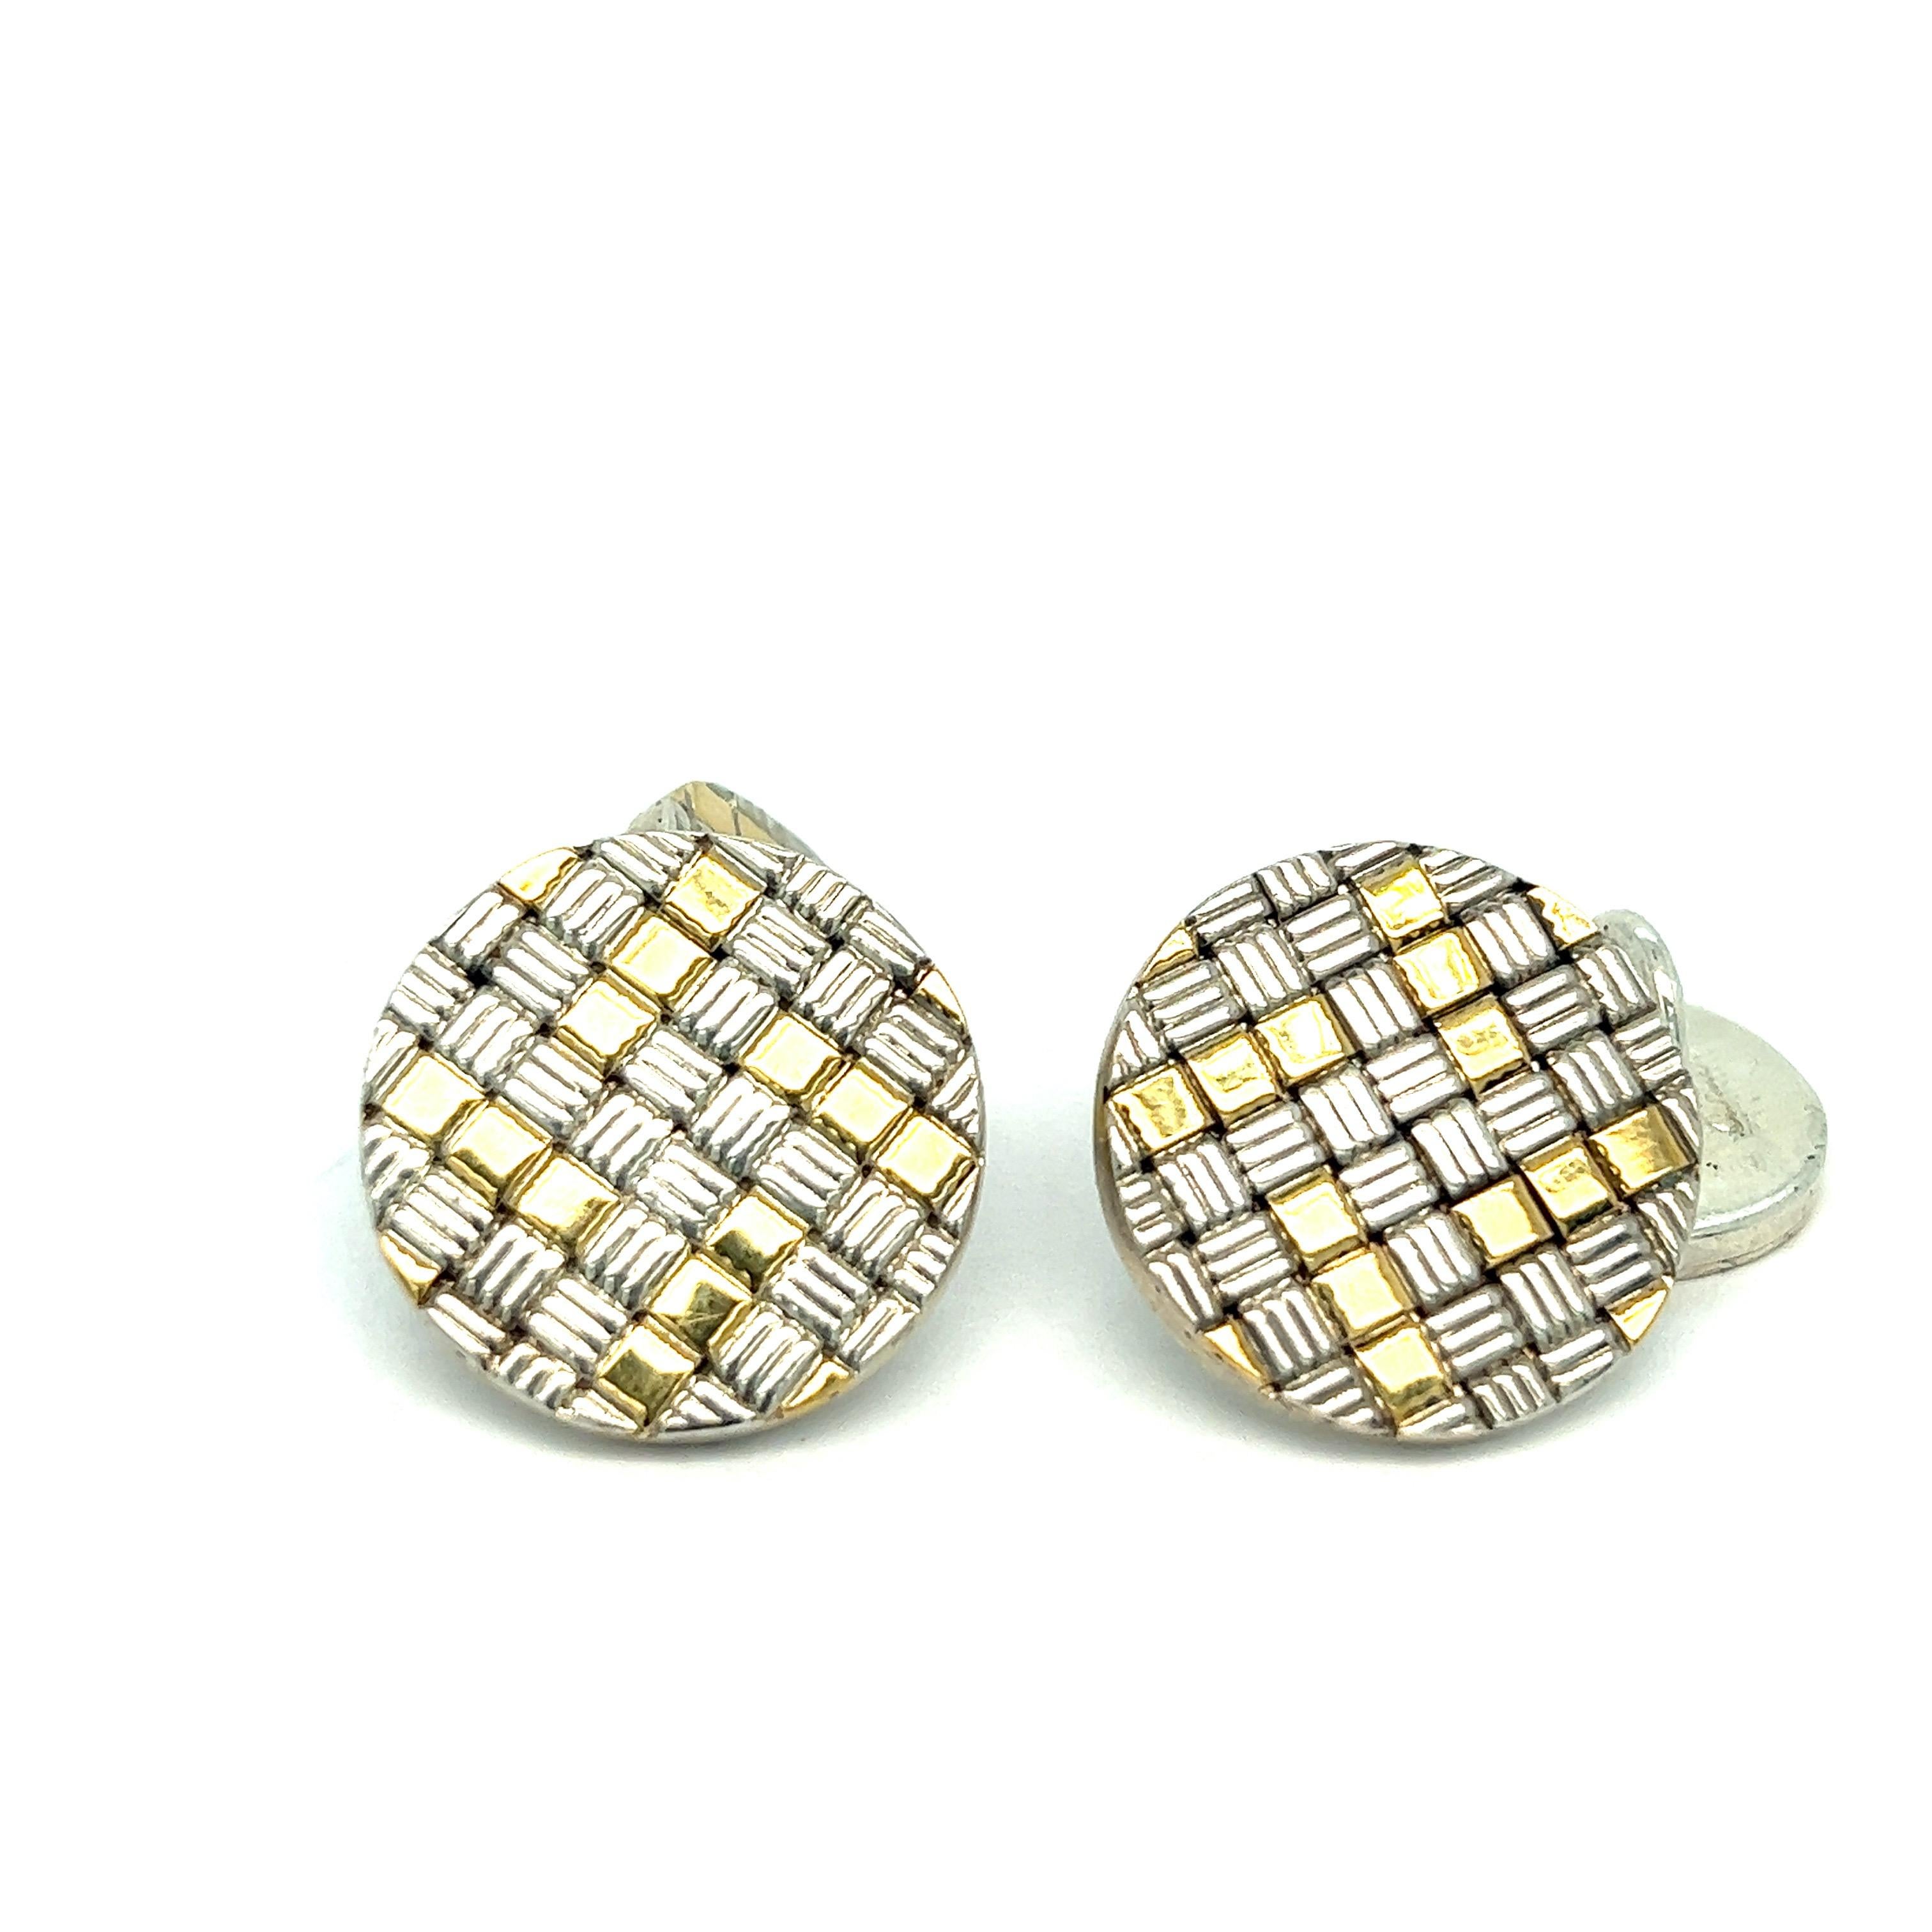 Pair of 18k gold and sterling silver large cufflinks by Cartier. Each top is 19 mm in diameter, back - 14 mm.  Marked: Cartier, Sterling, 18k. Weight - 18.2 grams.